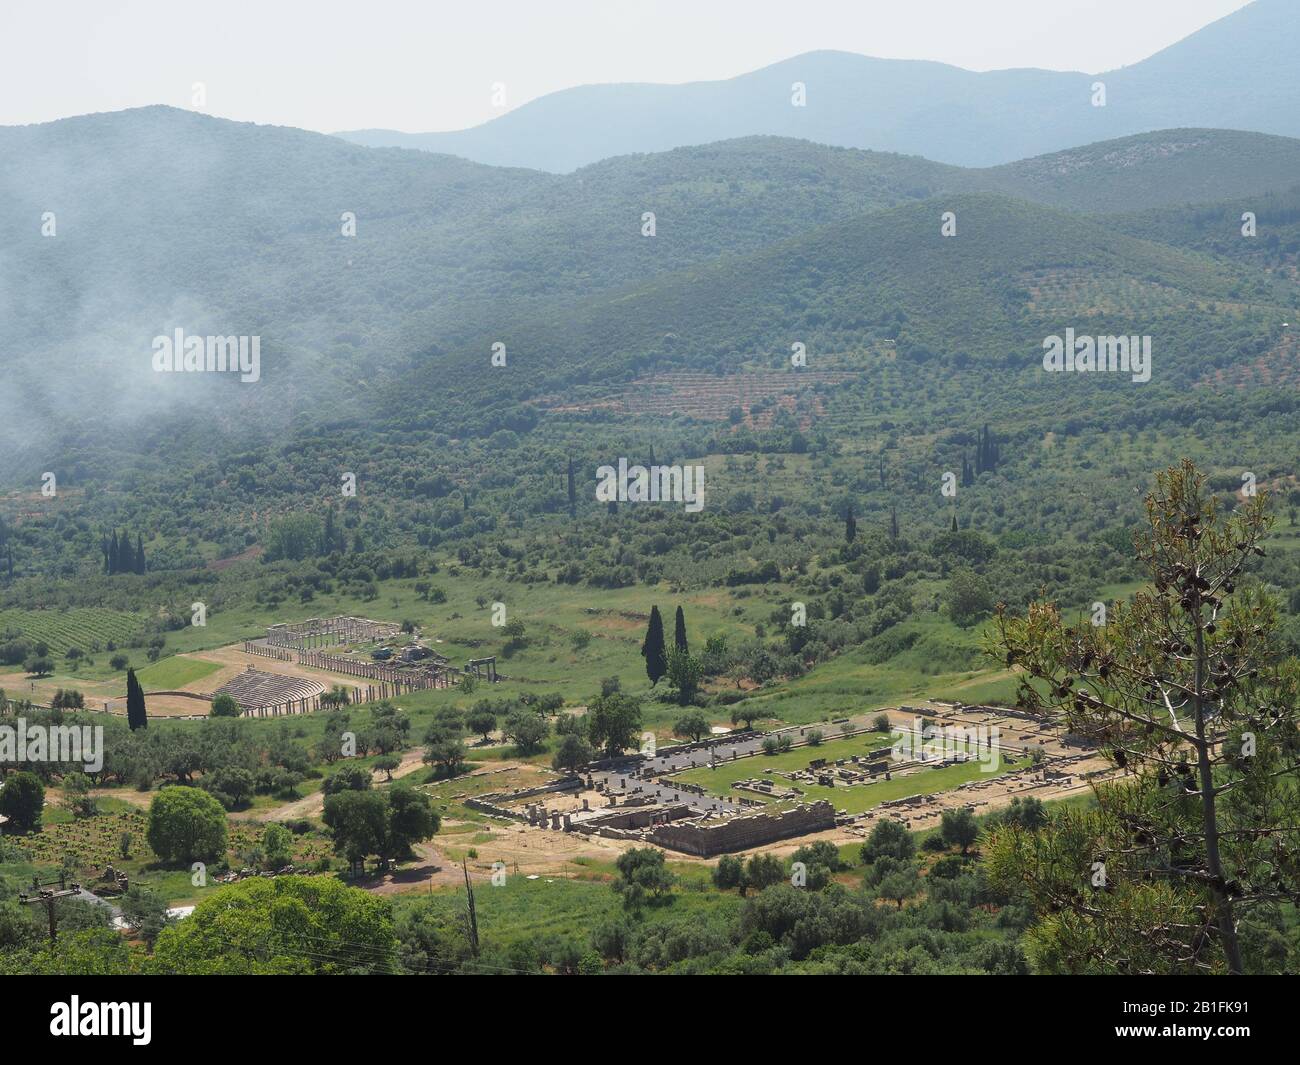 Looking down on the archaeological site of Ancient Messene, Ithomi, Messini, Messenia, Greece with the hills and mountains of the Peloponnese in the b Stock Photo